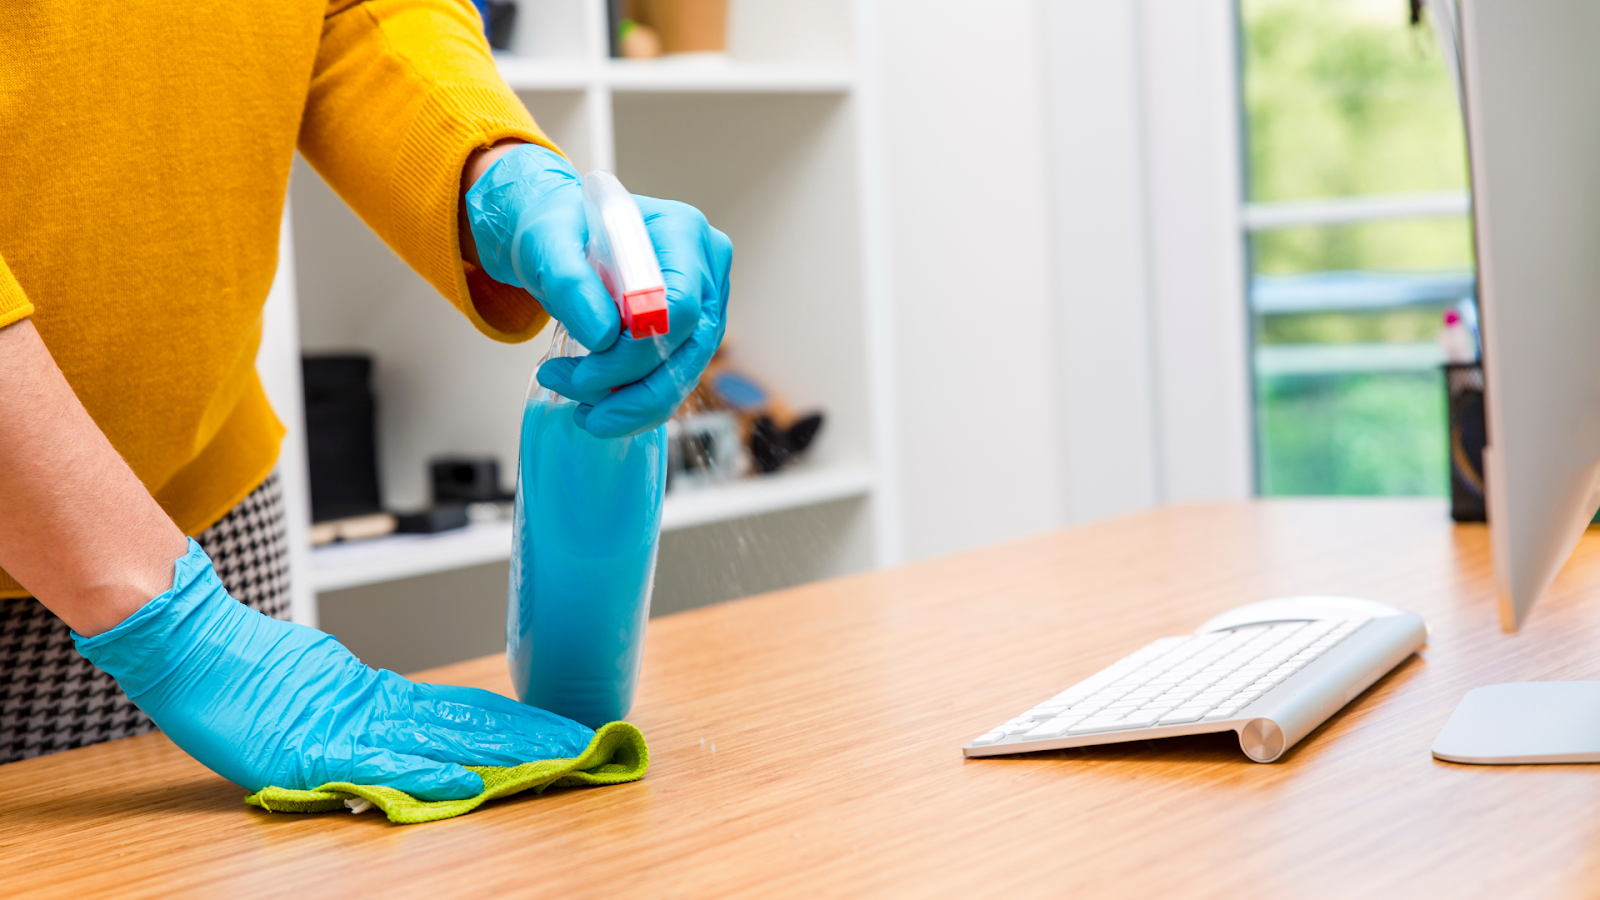 prevent accidents when cleaning